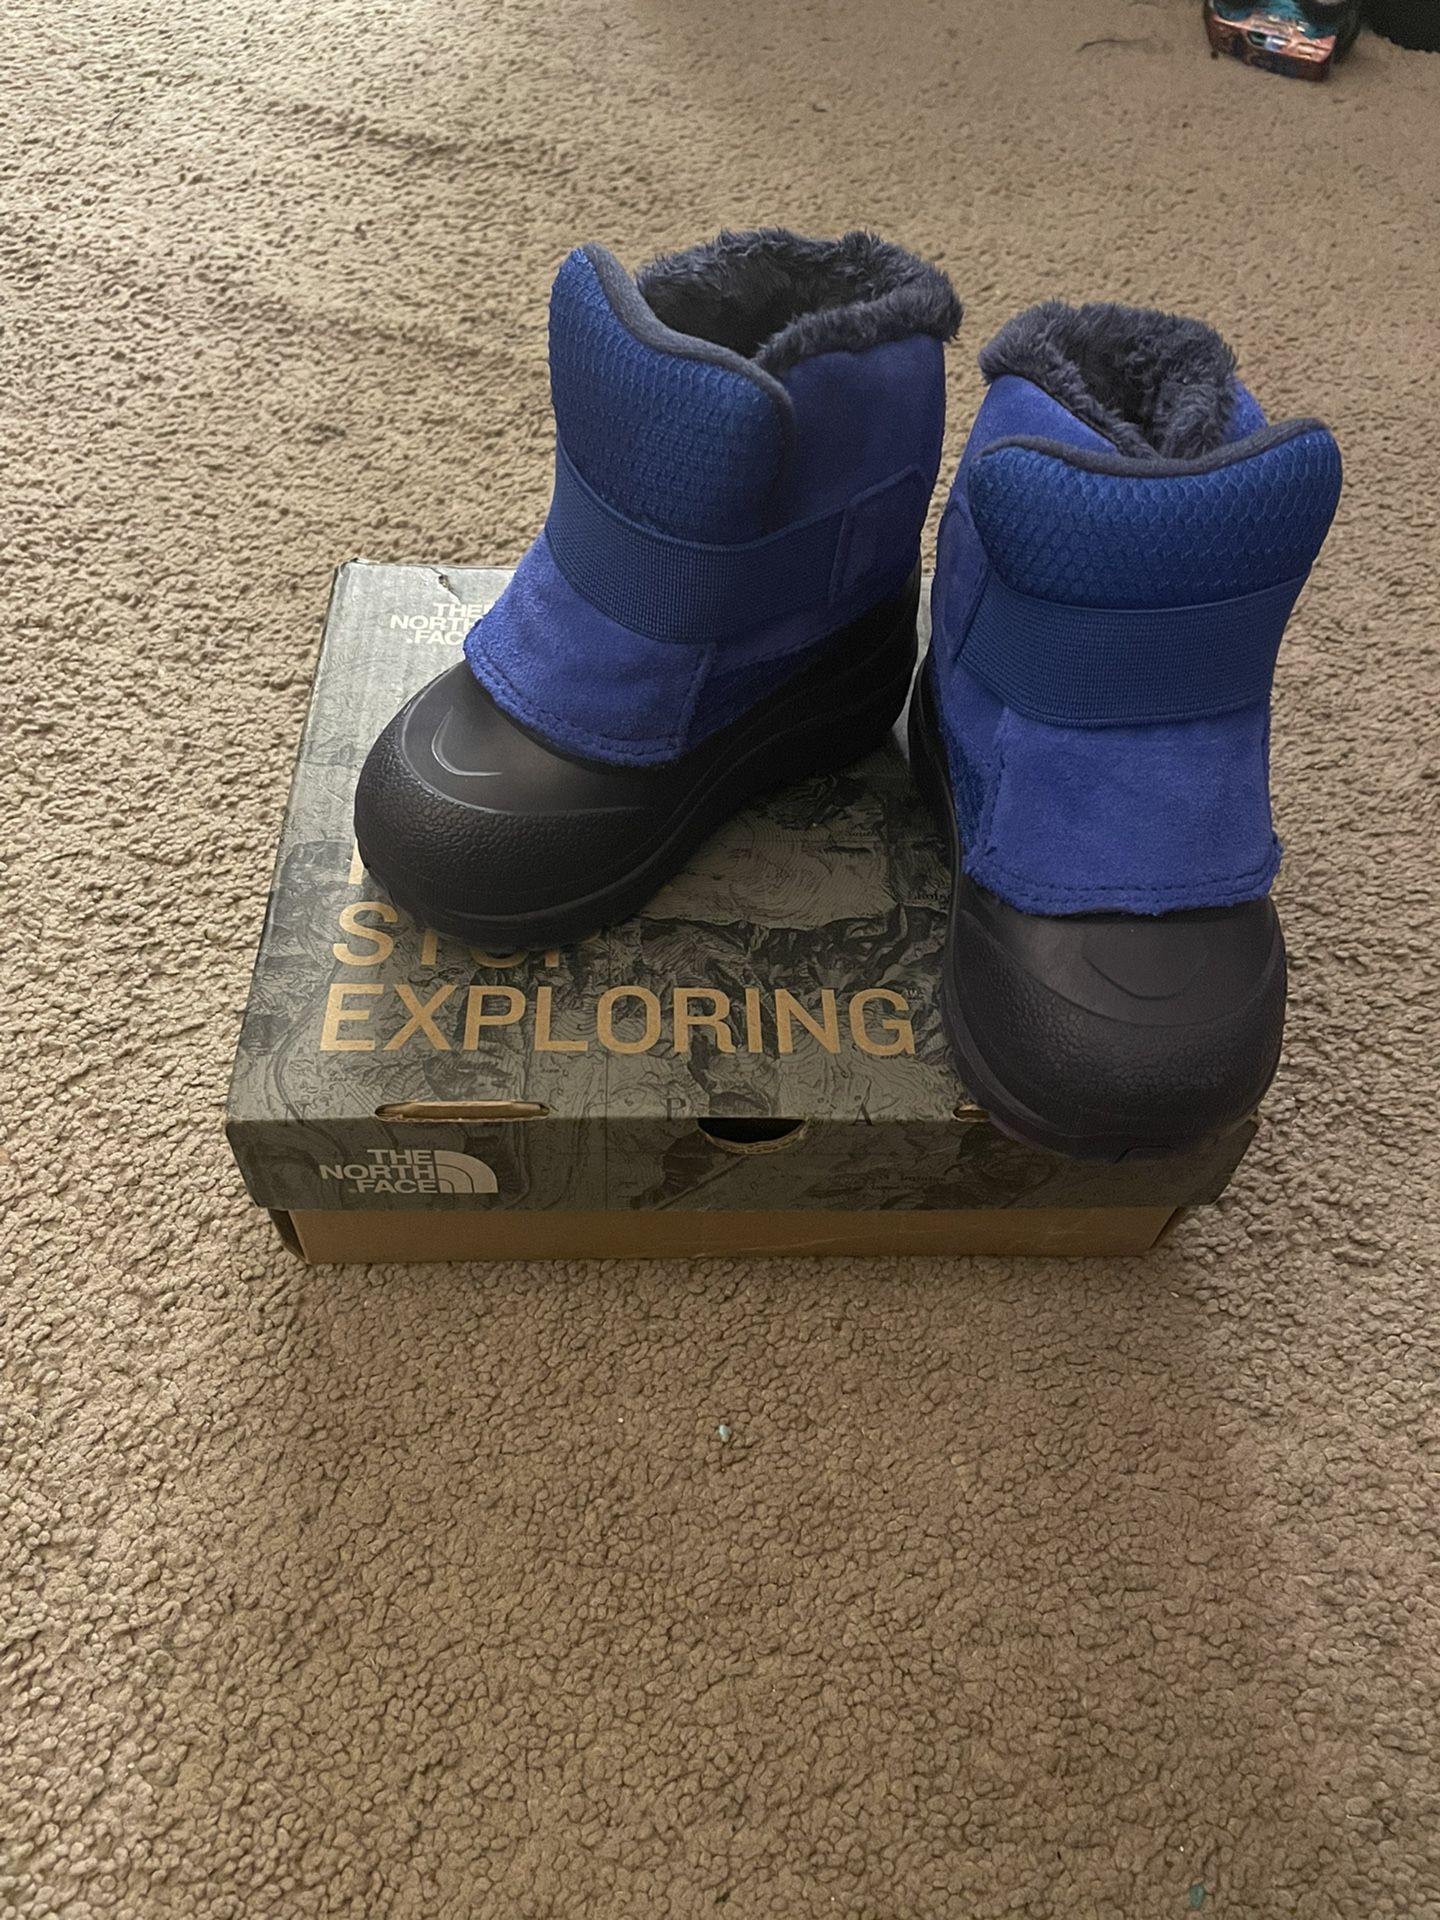 North Face Boots